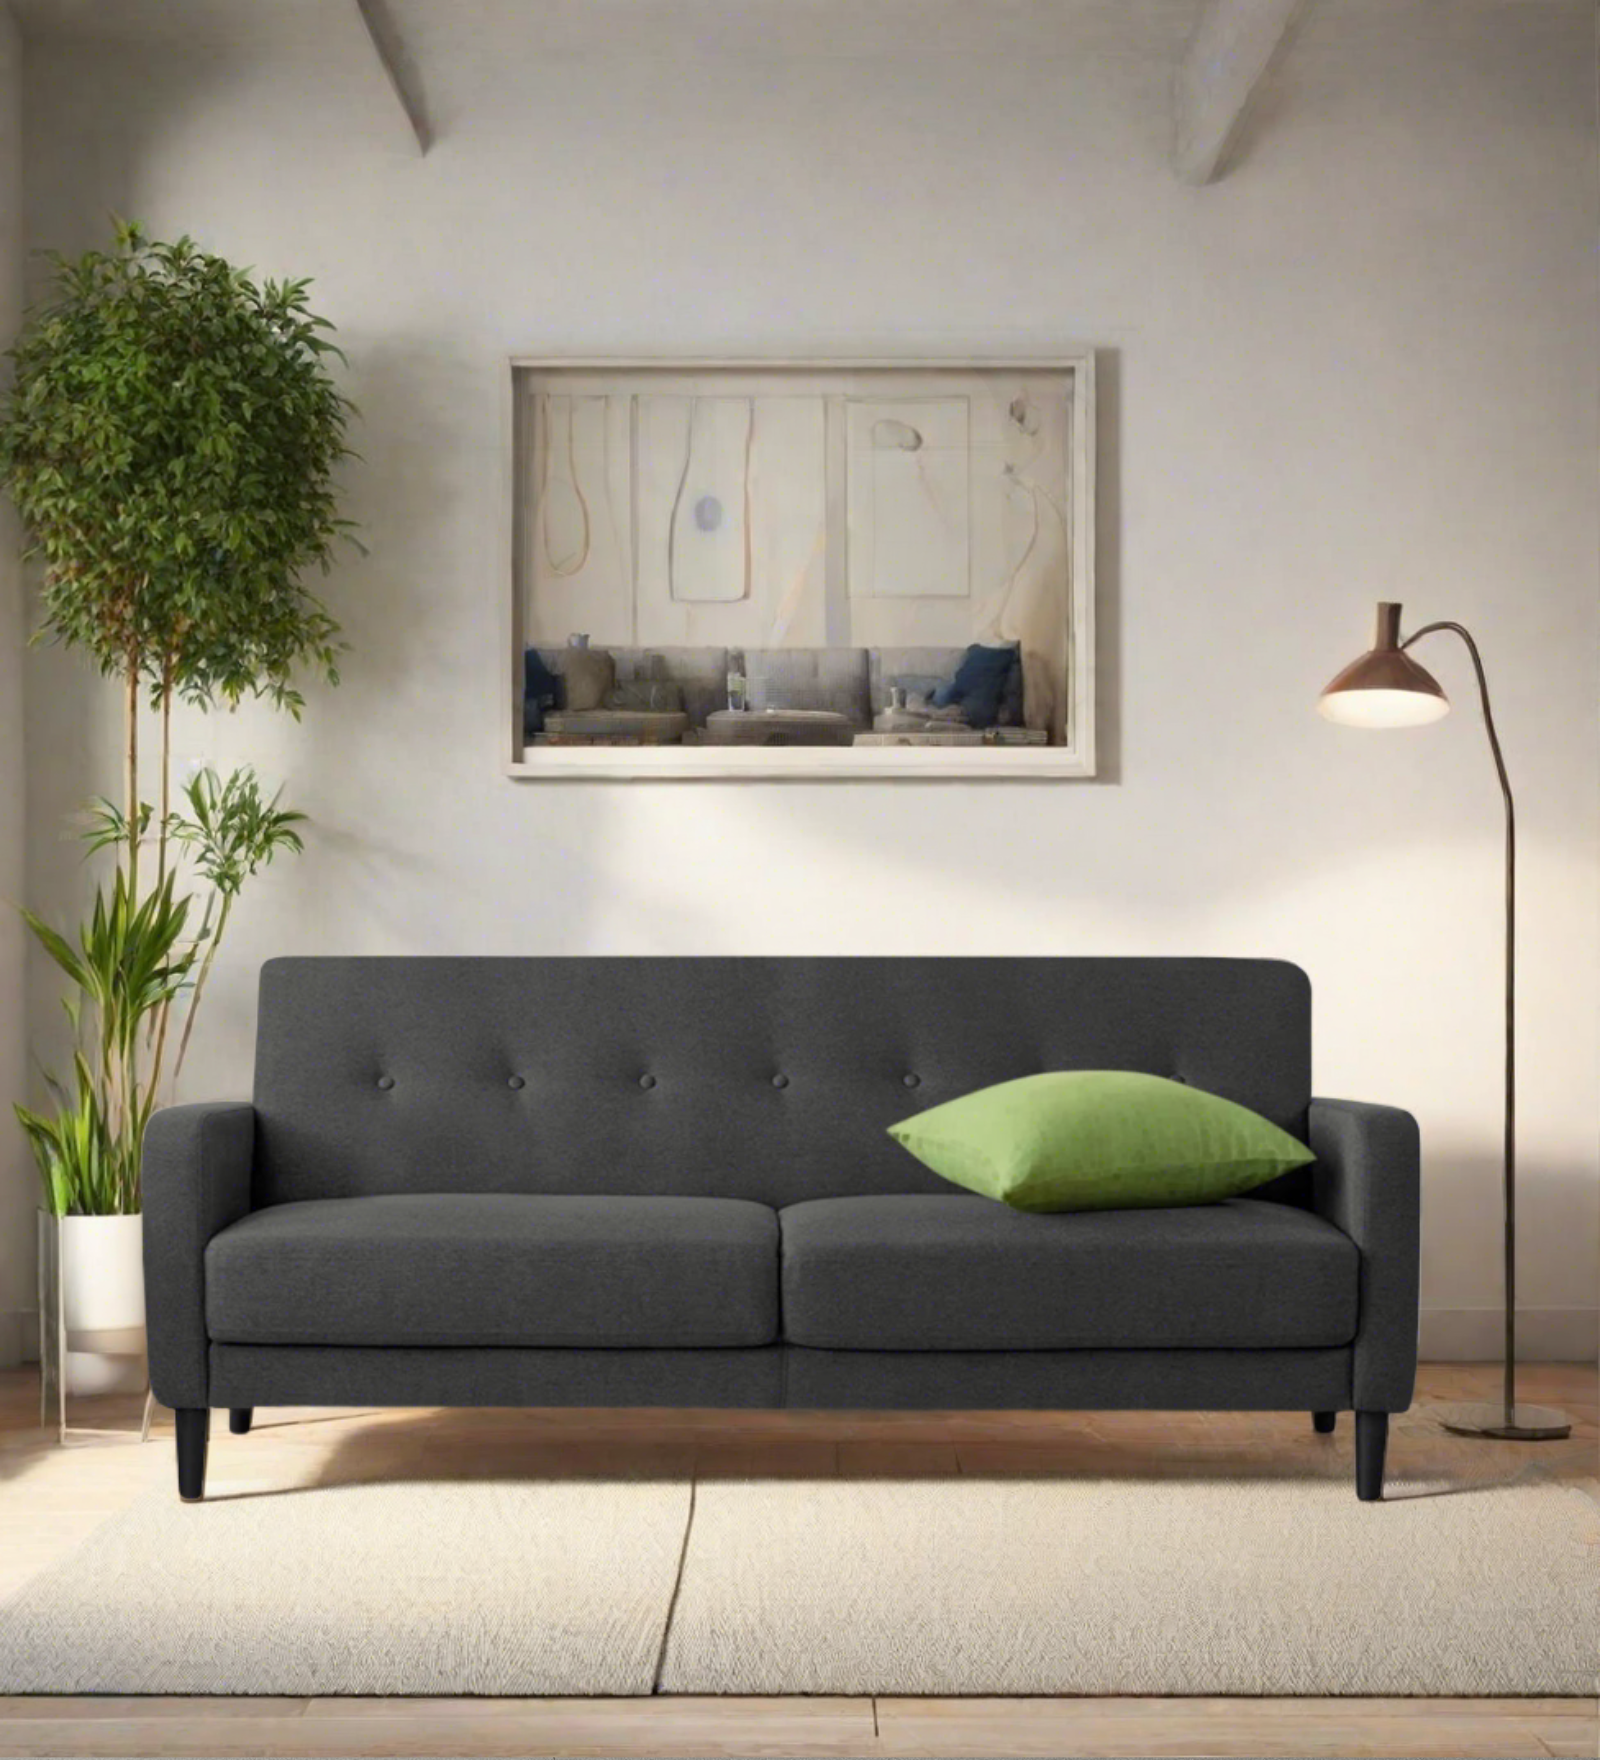 Marq Fabric 3 Seater Sofa in Charcoal Grey Colour